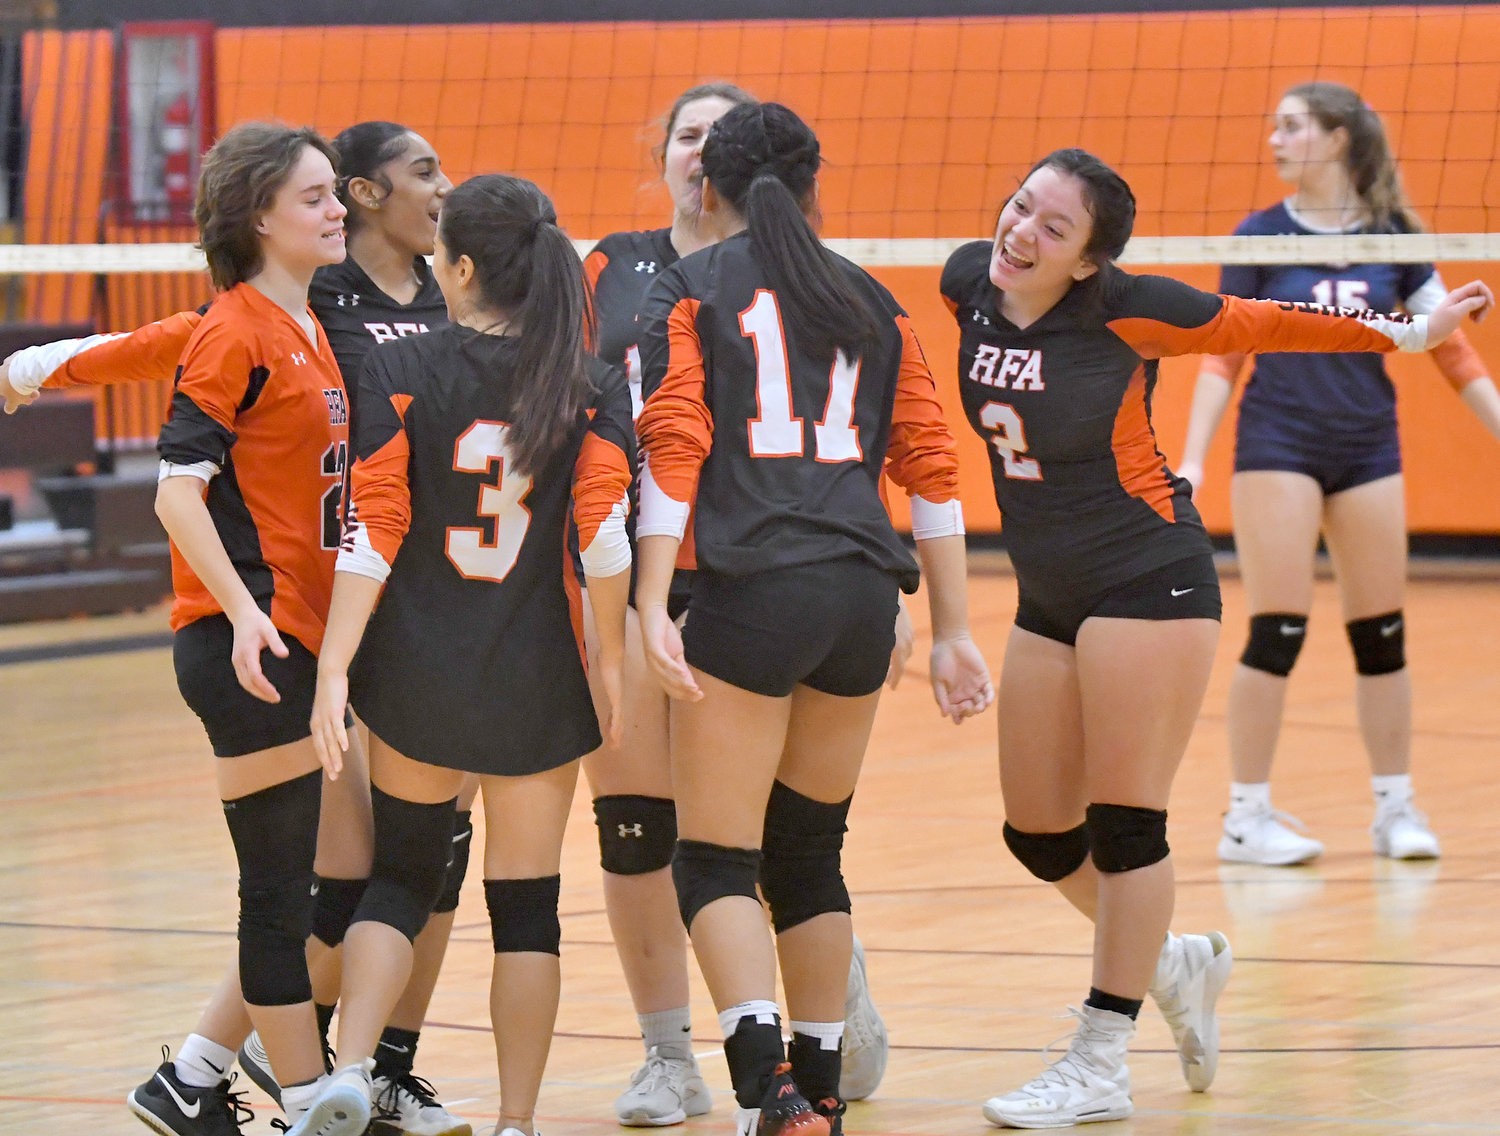 The Rome Free Academy girls volleyball team celebrates winning the first set in the Class A quarterfinal match against East Syracuse-Minoa on Friday at Strough Middle School in Rome. RFA won in four sets to advance to the semifinals.